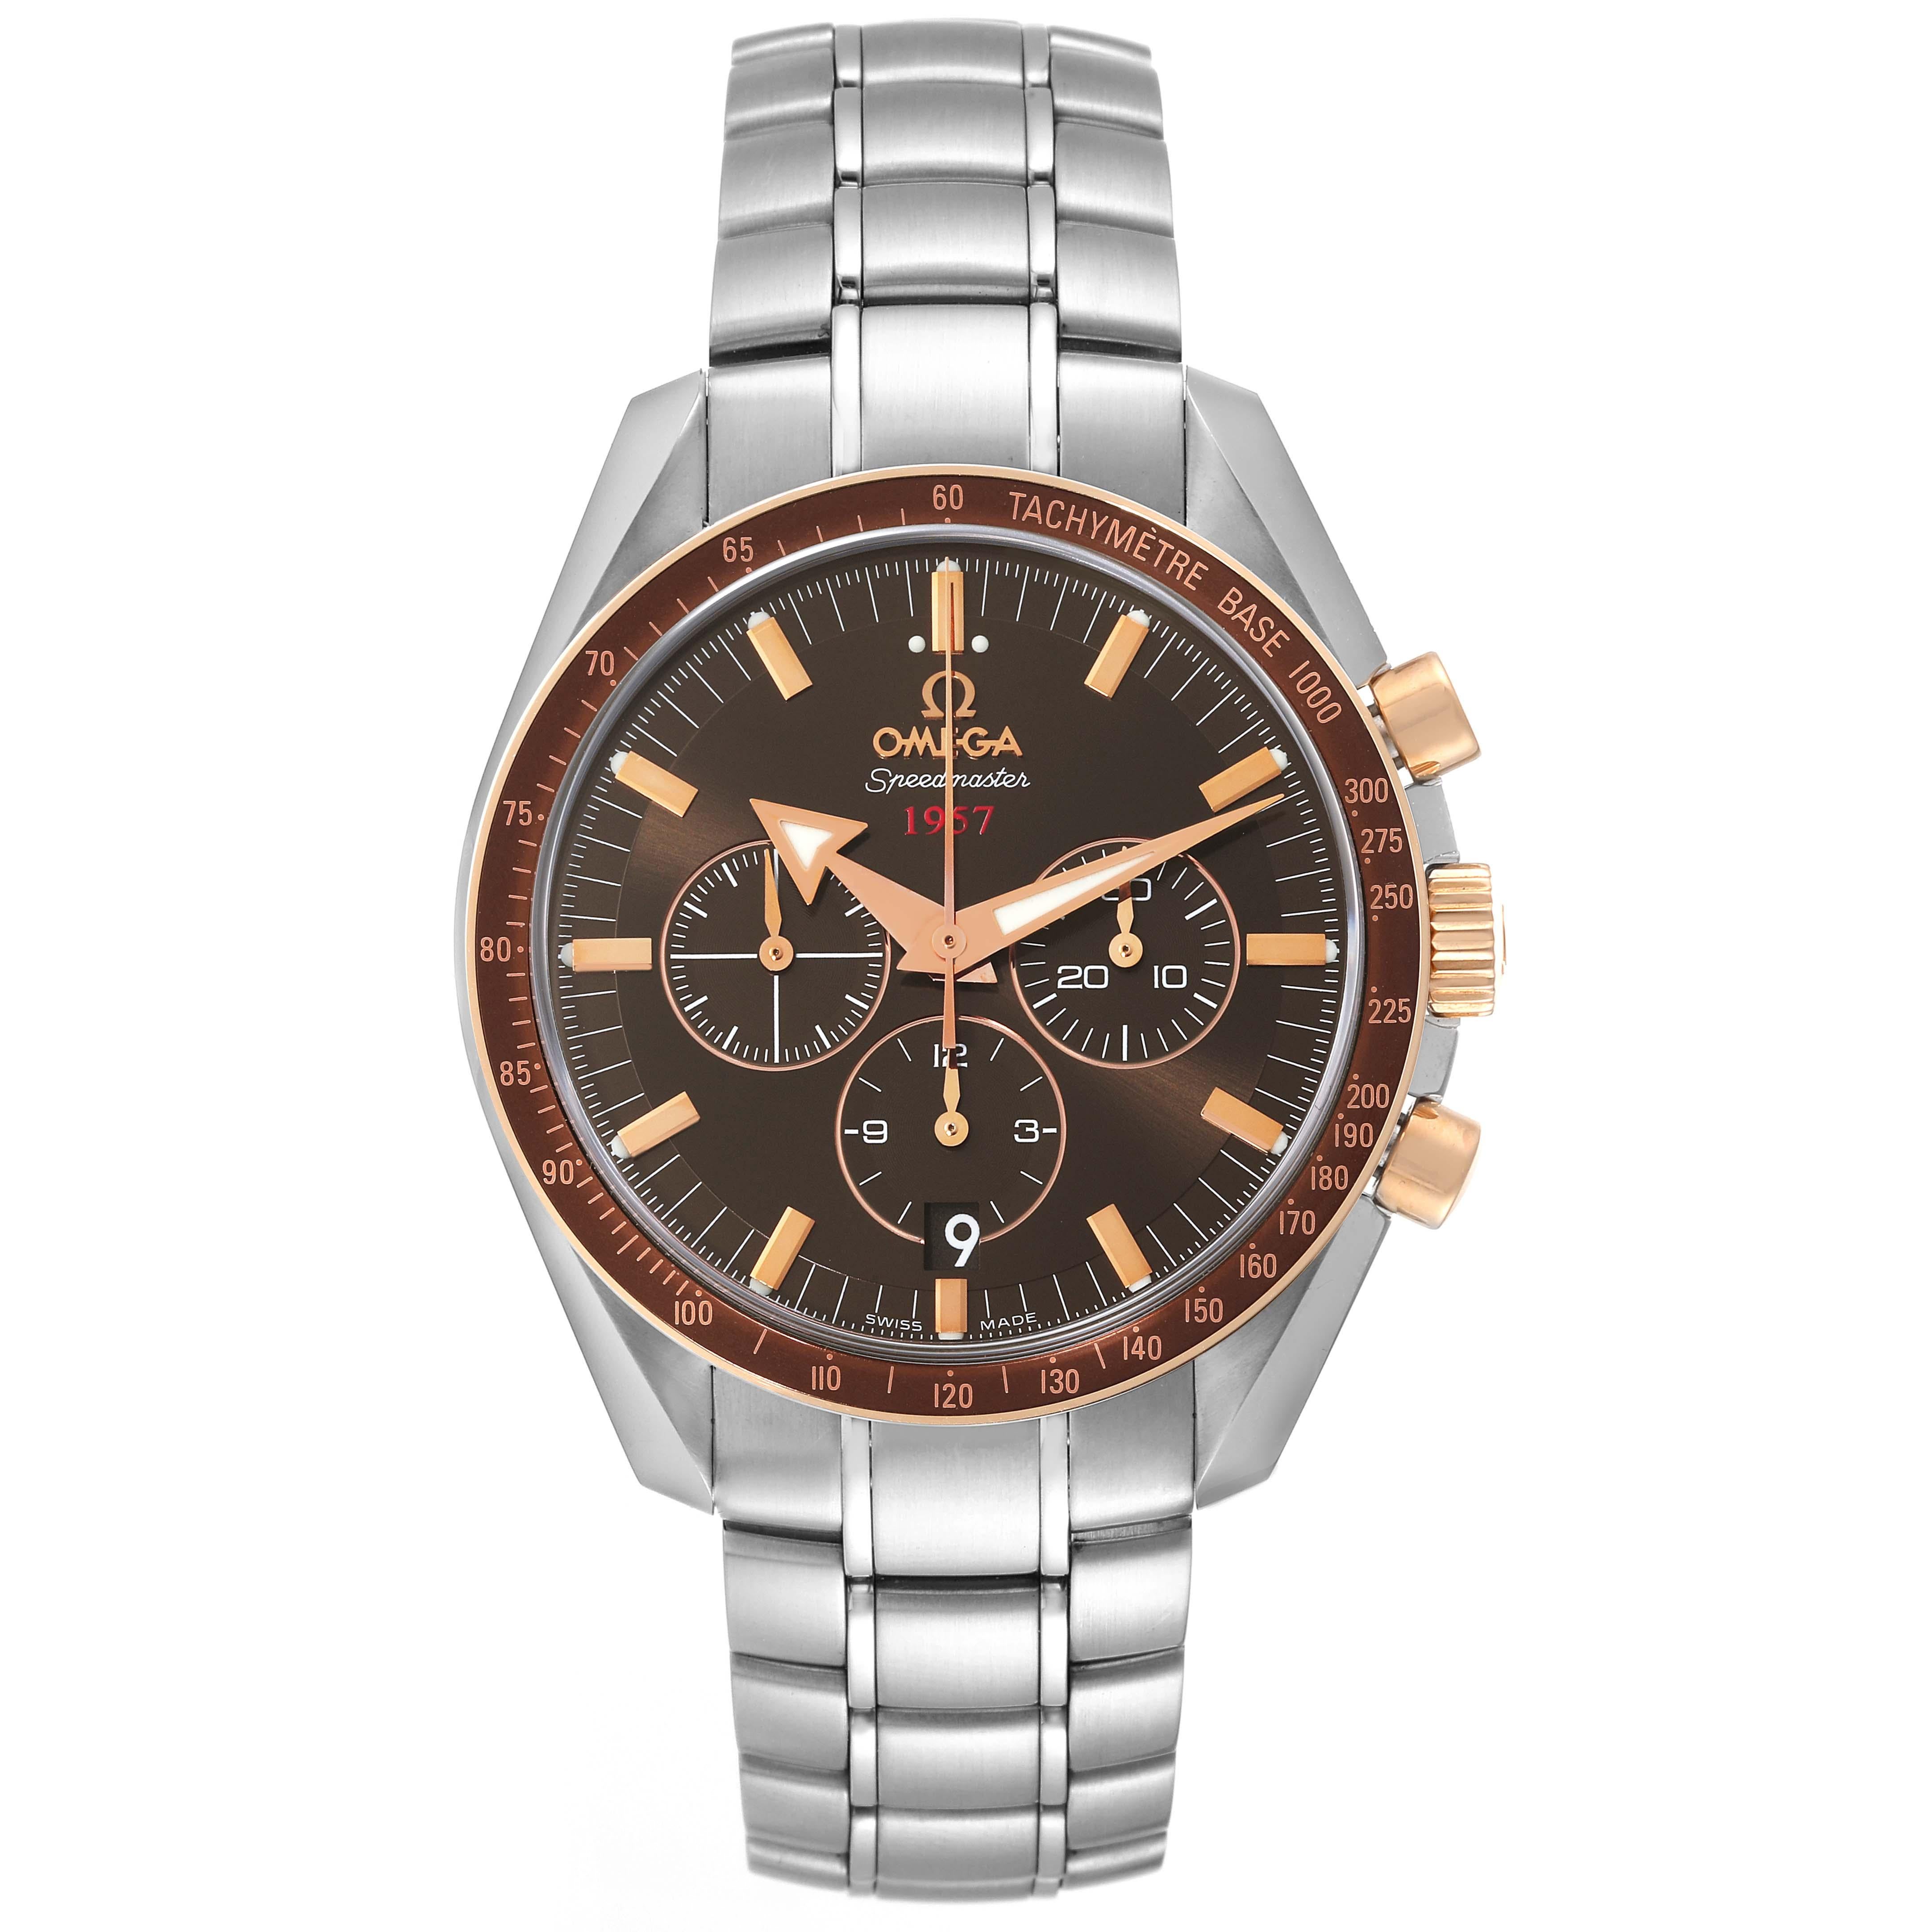 Omega Speedmaster 1957 Steel Rose Gold Mens Watch 321.90.42.50.13.002 Box Card. Automatic self-winding chronograph movement with column wheel mechanism and Co-Axial Escapement. Stainless steel round case 42.0 mm in diameter. Rose gold crown and